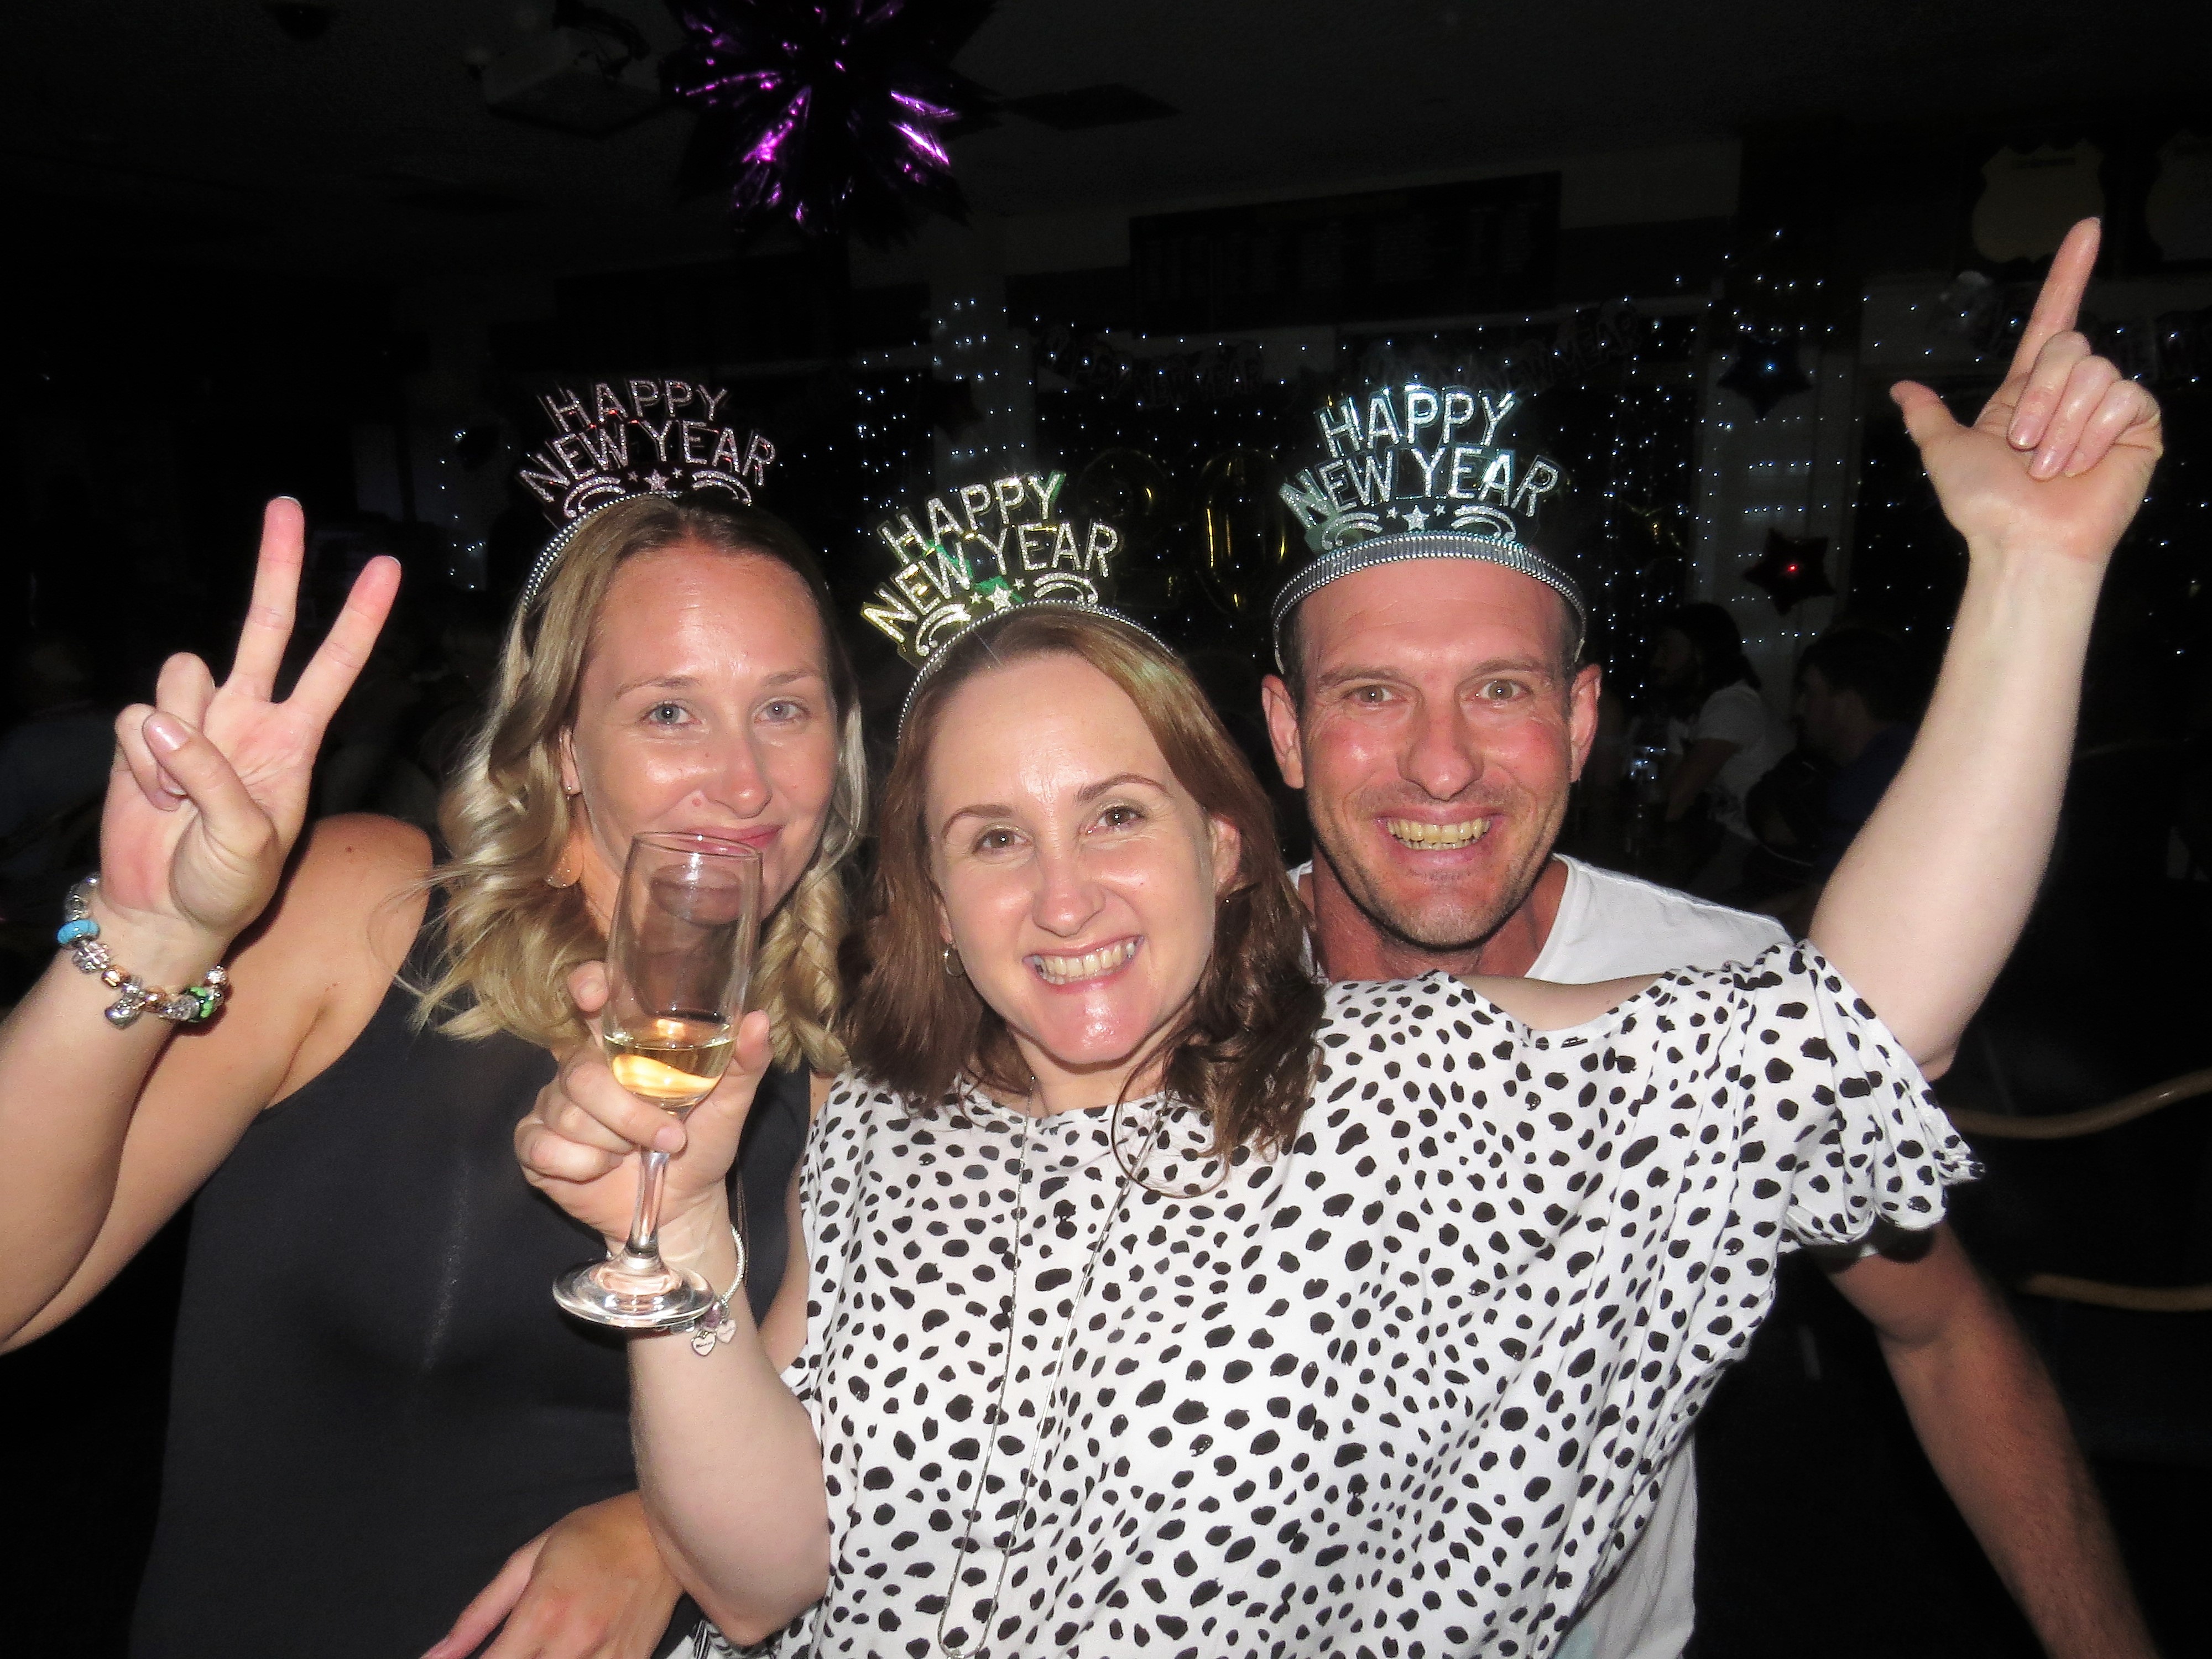 Stacey Hoare, Kirsty Harvey and Darren Carrall ring in the New Year at Bulahdelah Bowling Club.